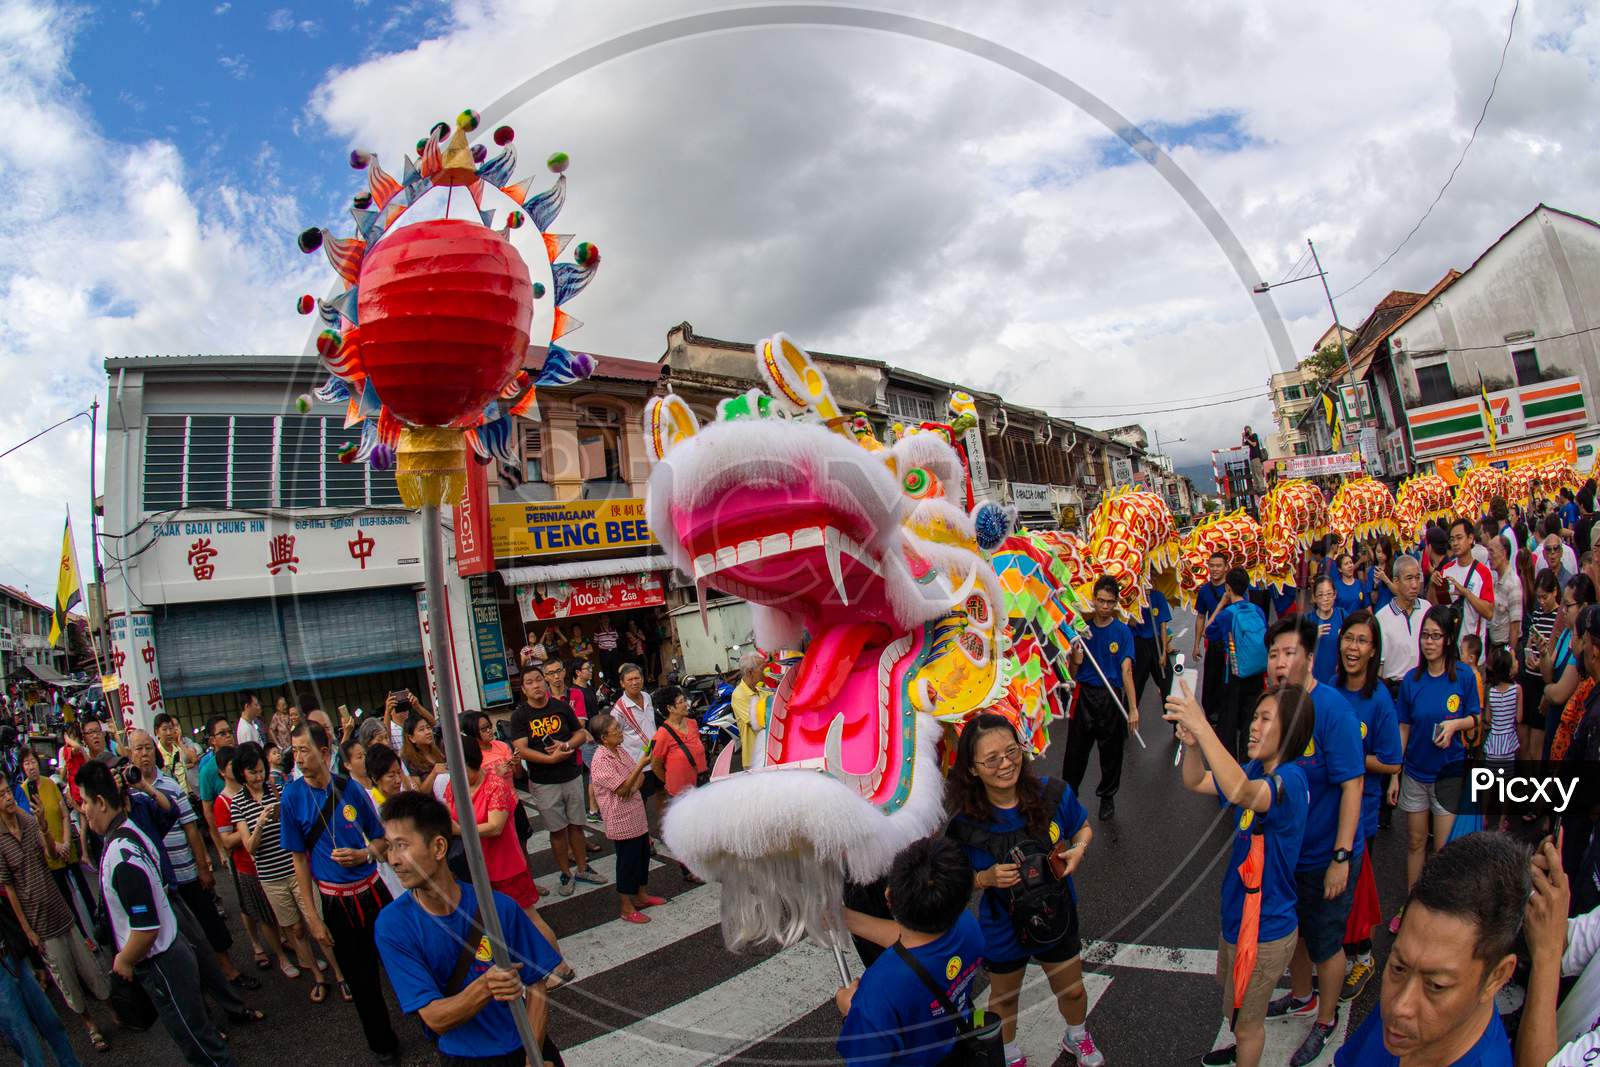 The Longest Dragon Dance At Malaysia Perform At The Street